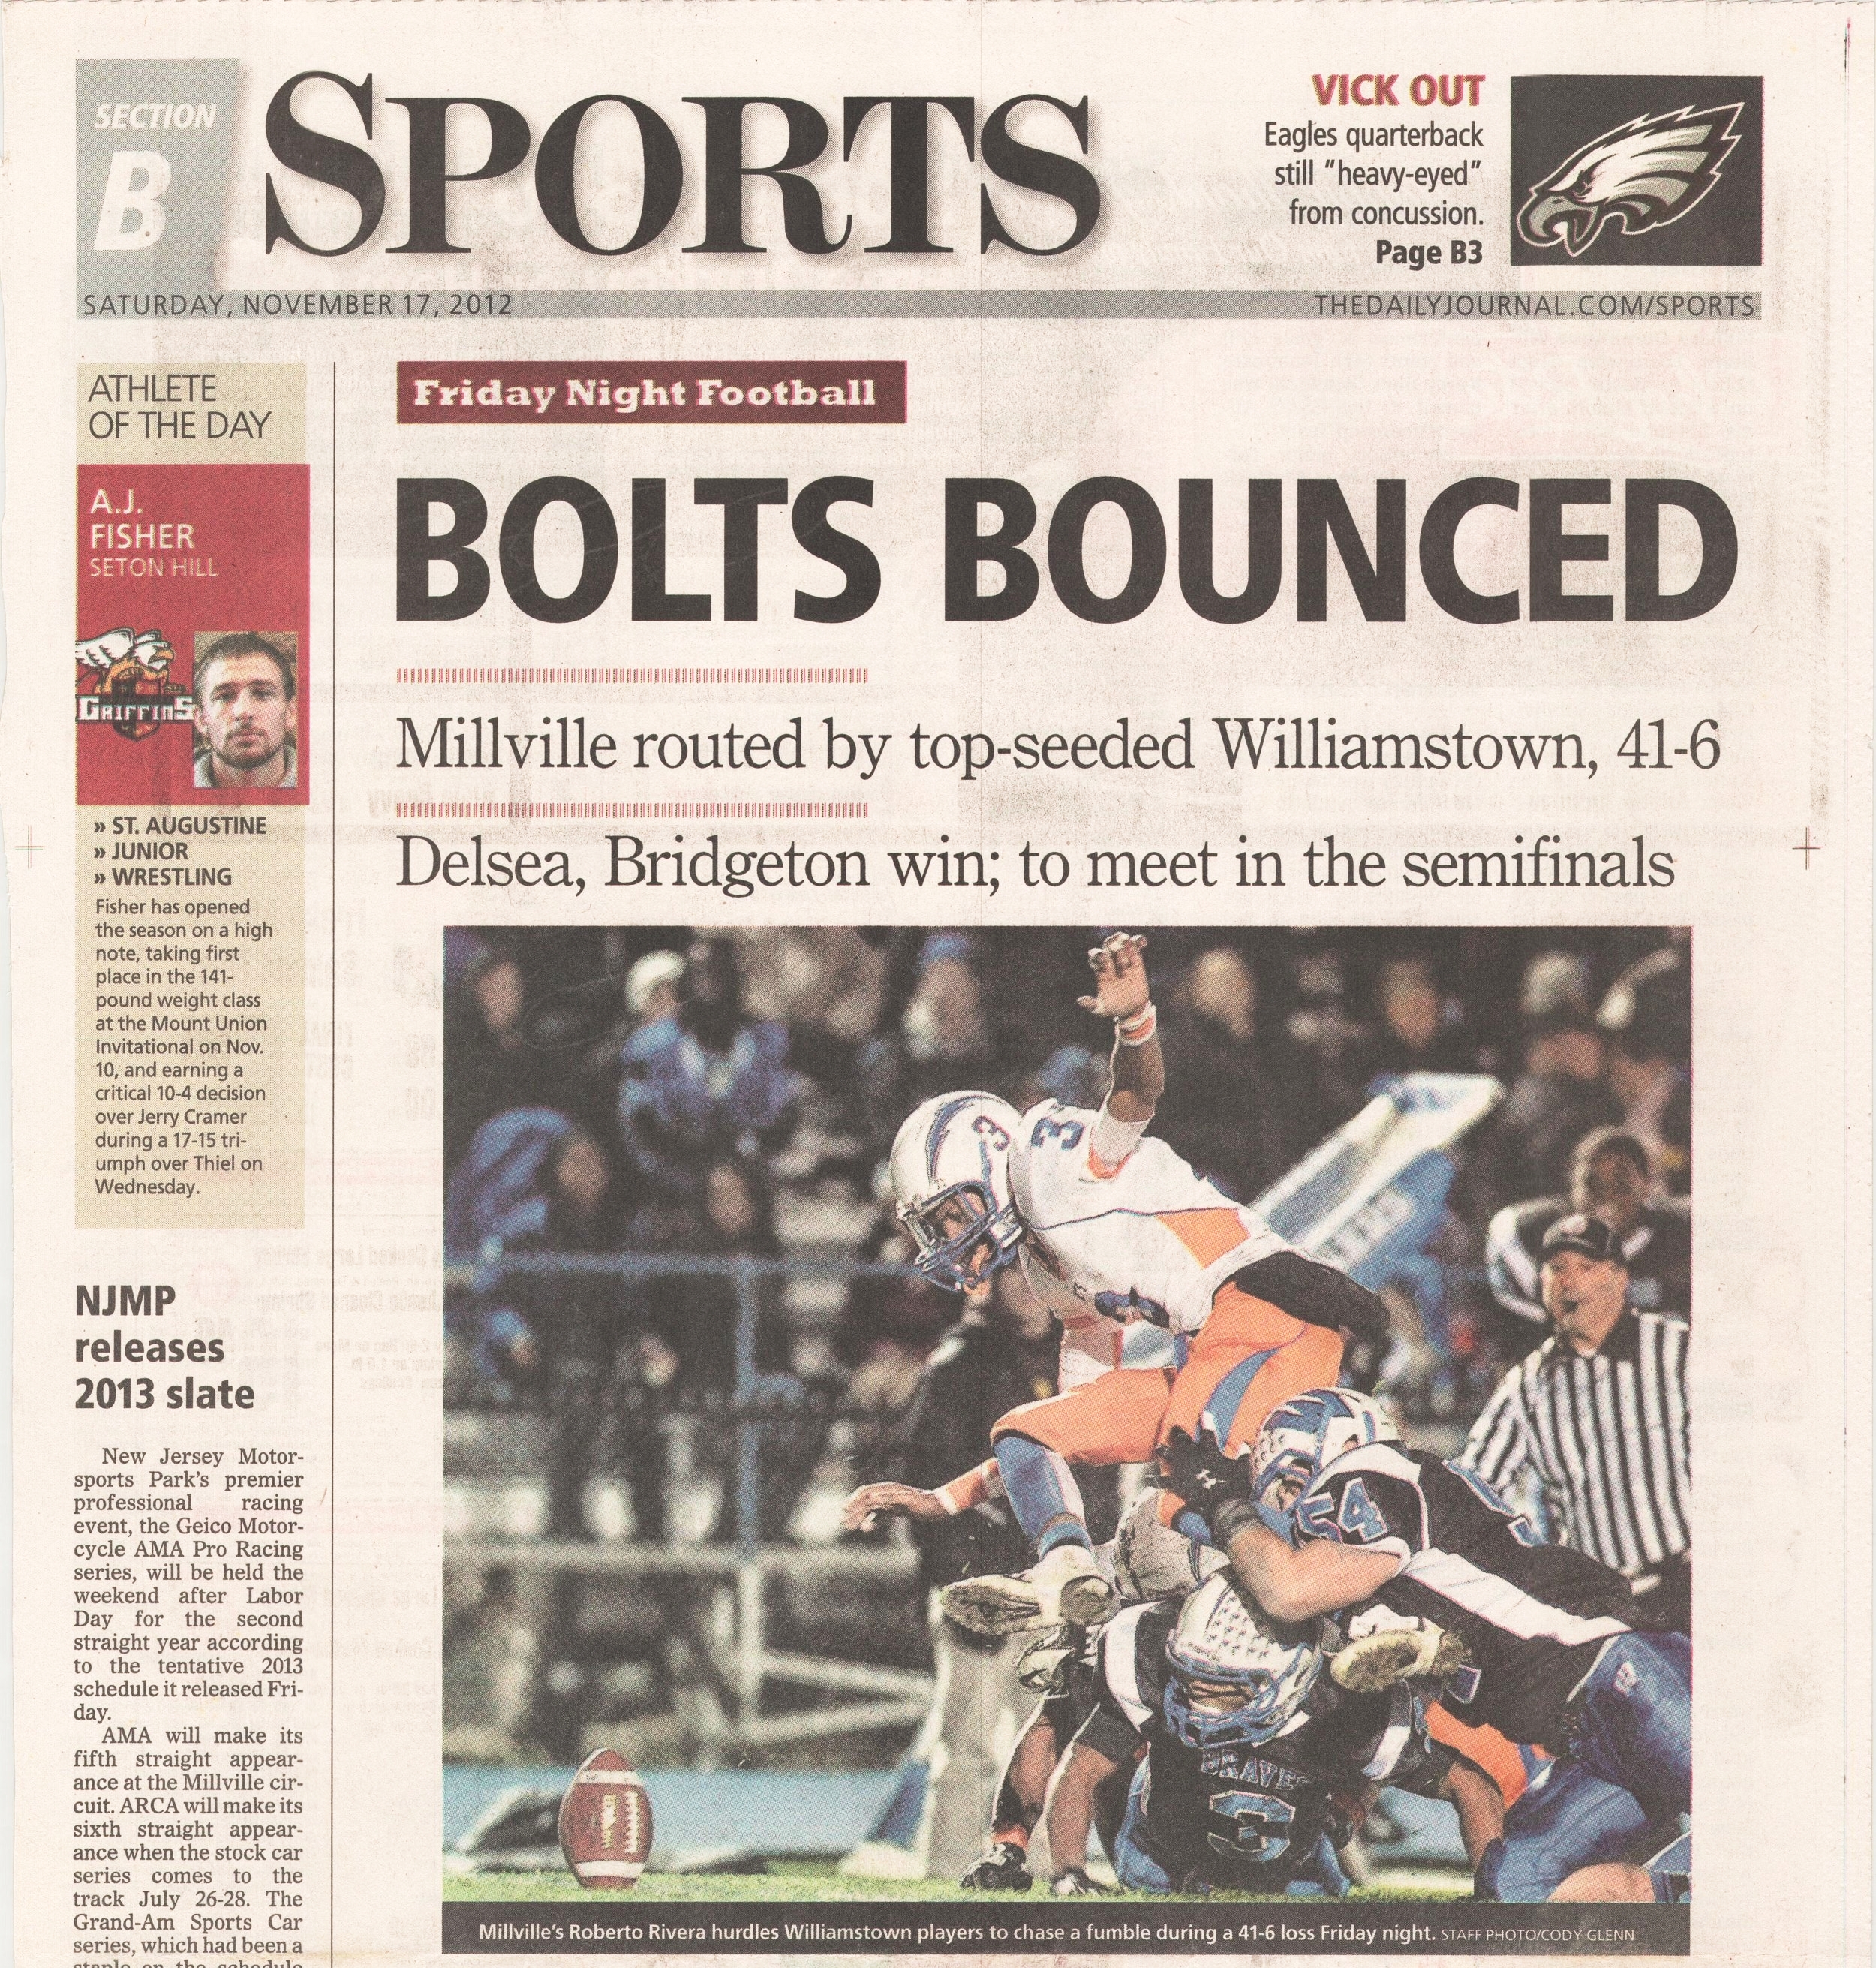  Millville v Williamstown playoff football November 17, 2012 /  The Daily Journal  